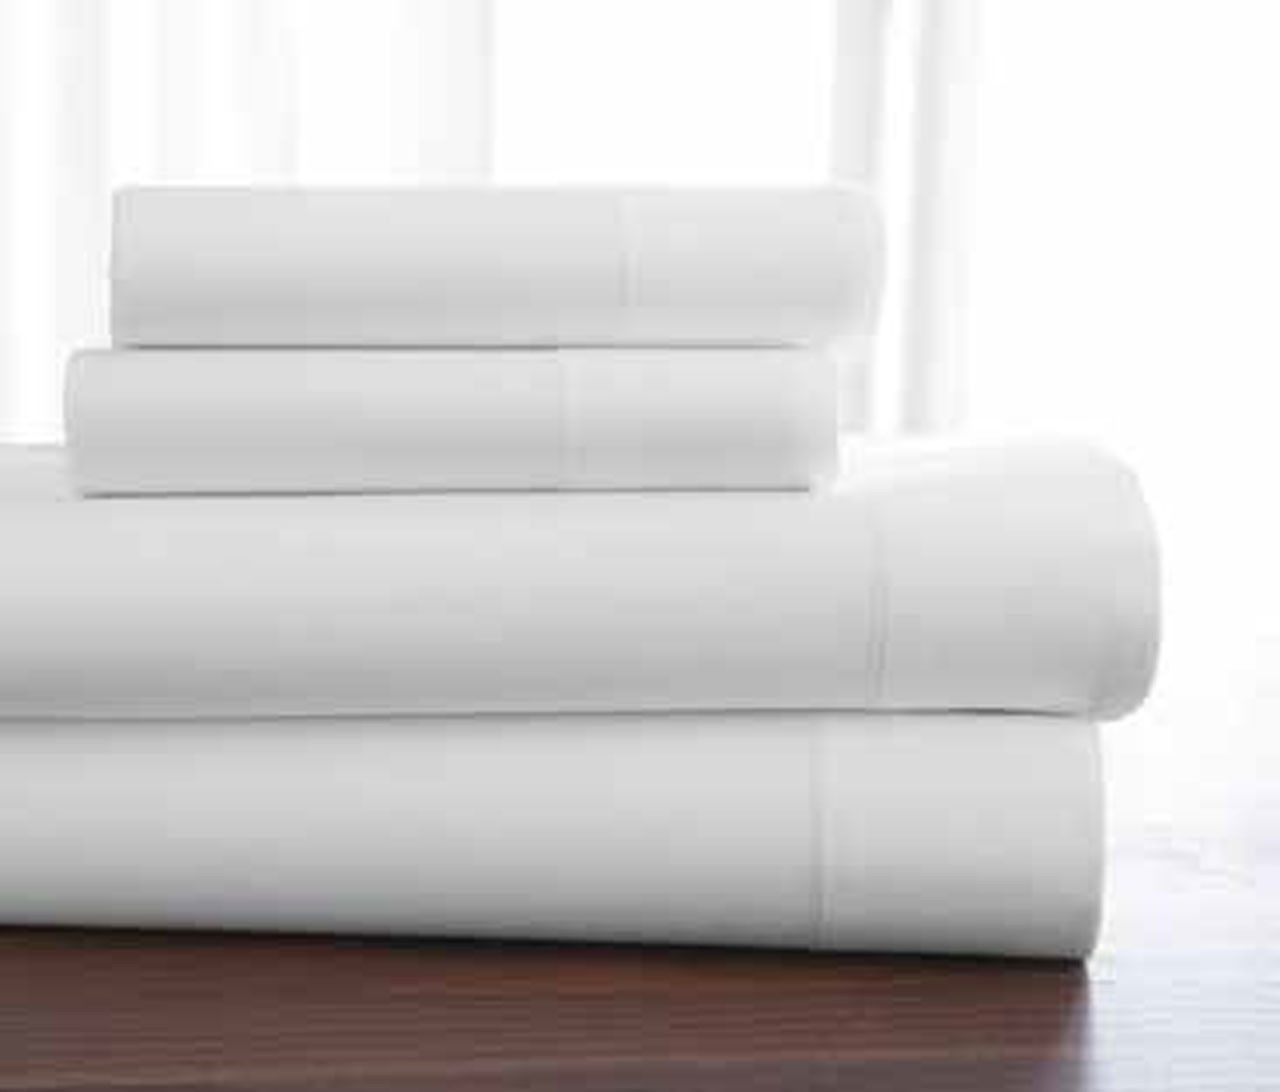 What is the thread count and composition of these Welspun T-400 Premium hygrocotton sheets?